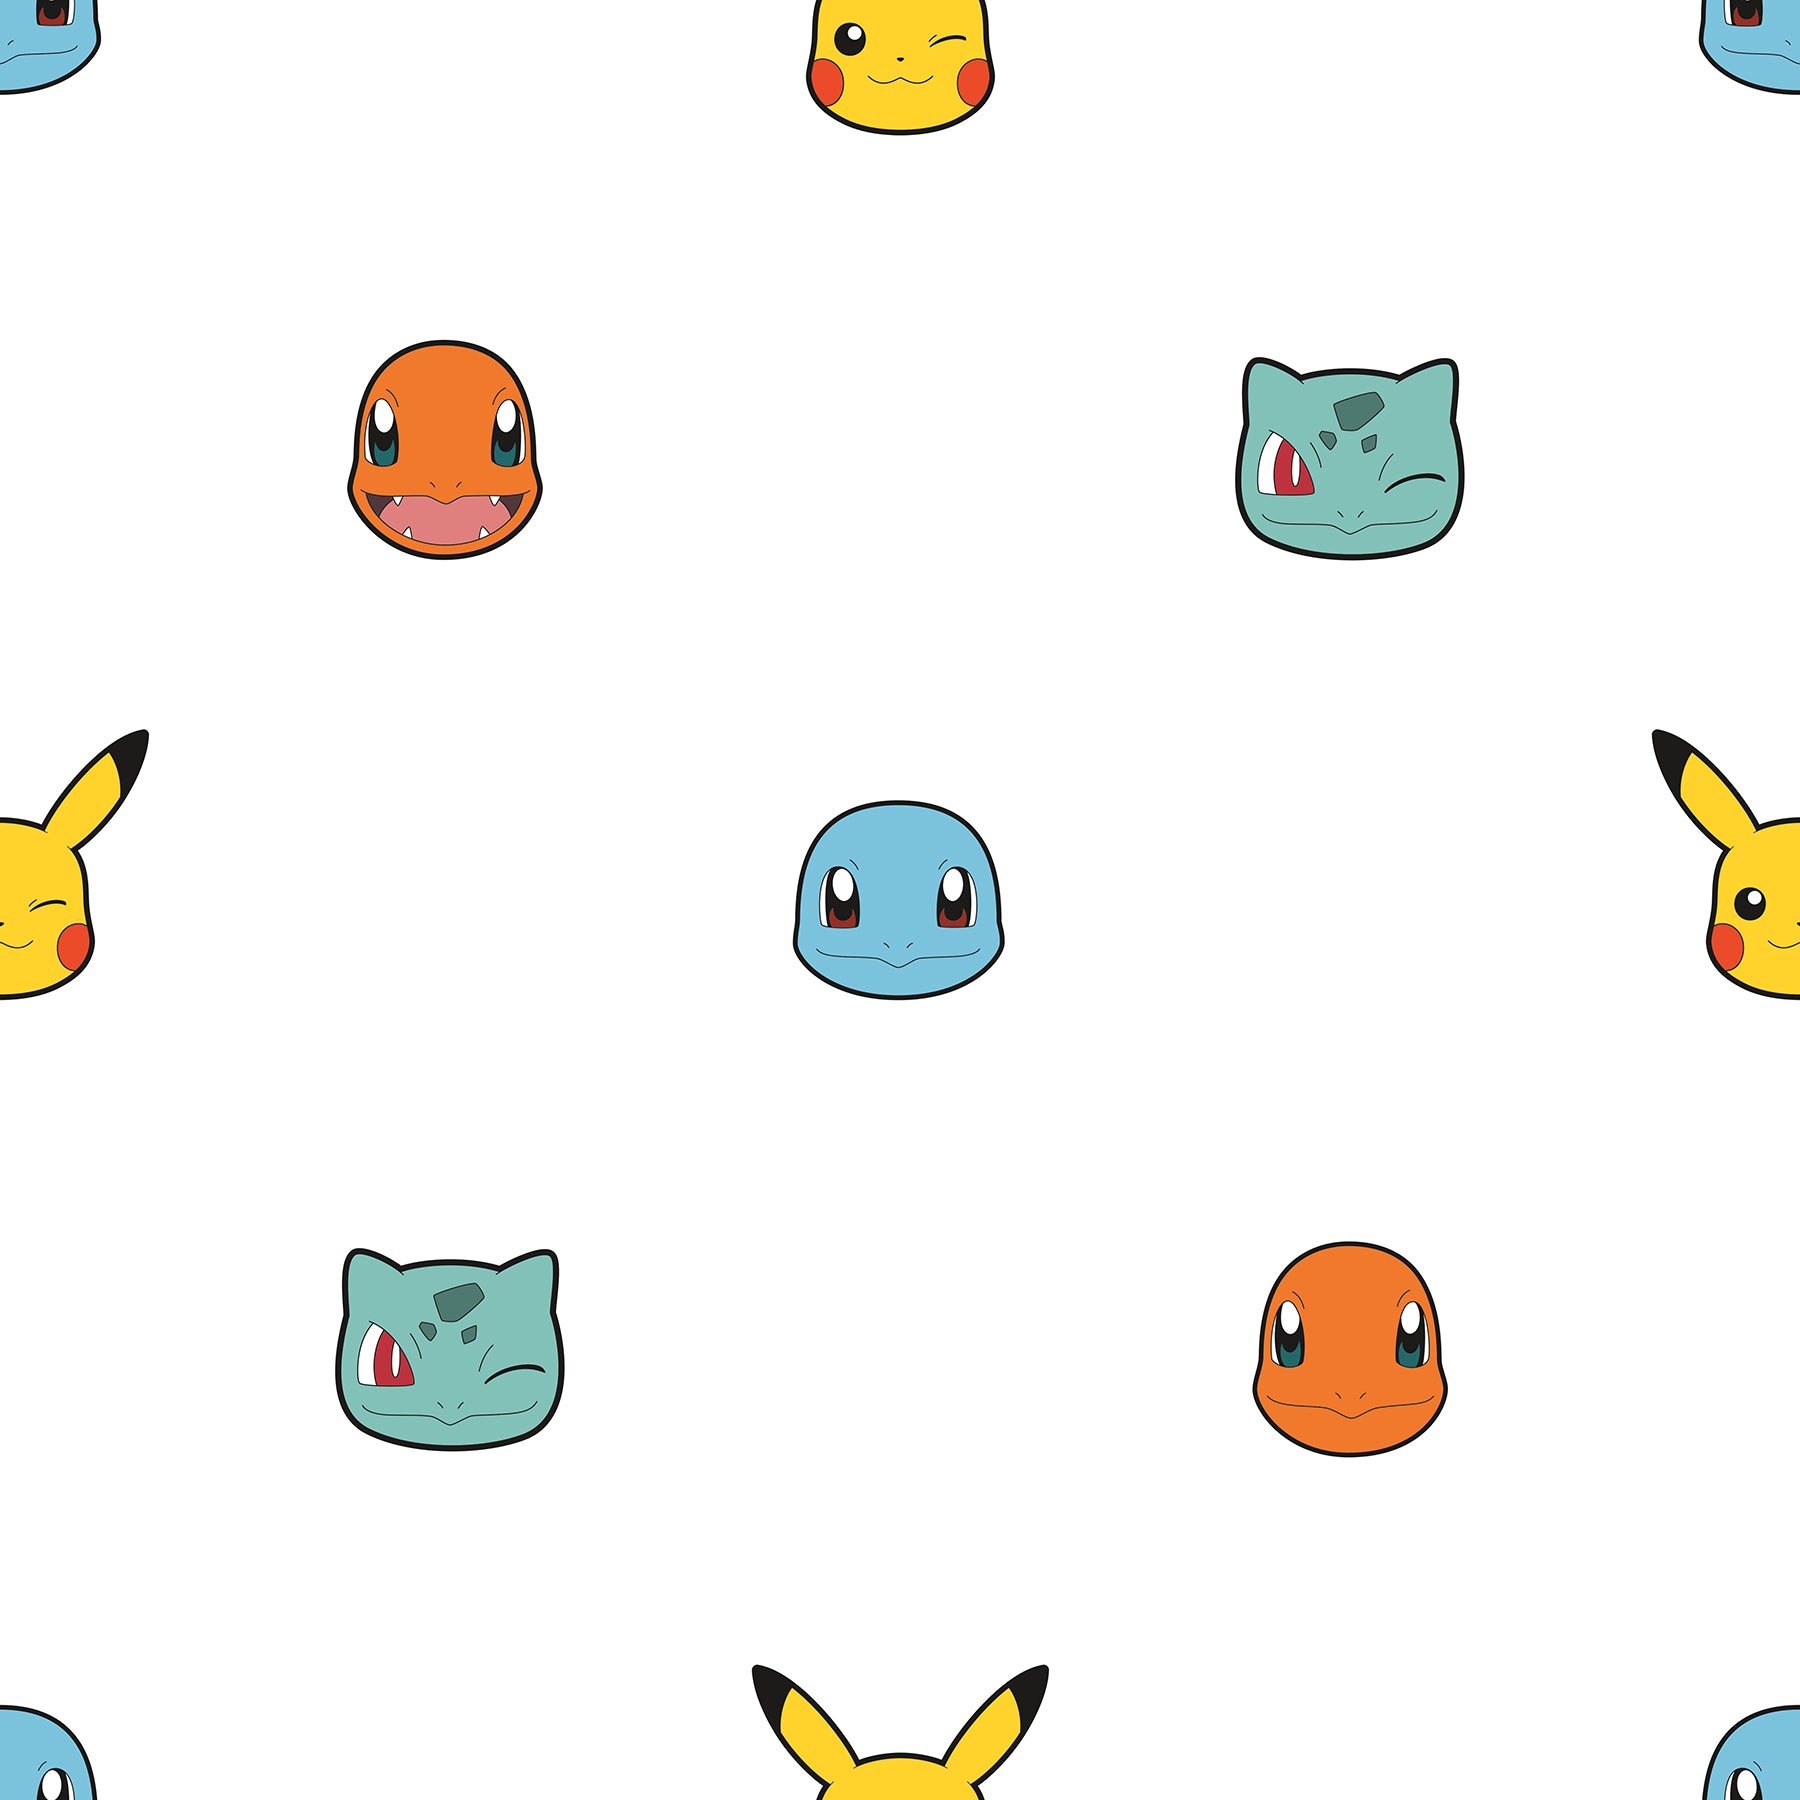 Pokémon Character Faces Peel and Stick Wallpaper Peel and Stick Wallpaper RoomMates Roll Multicolor 